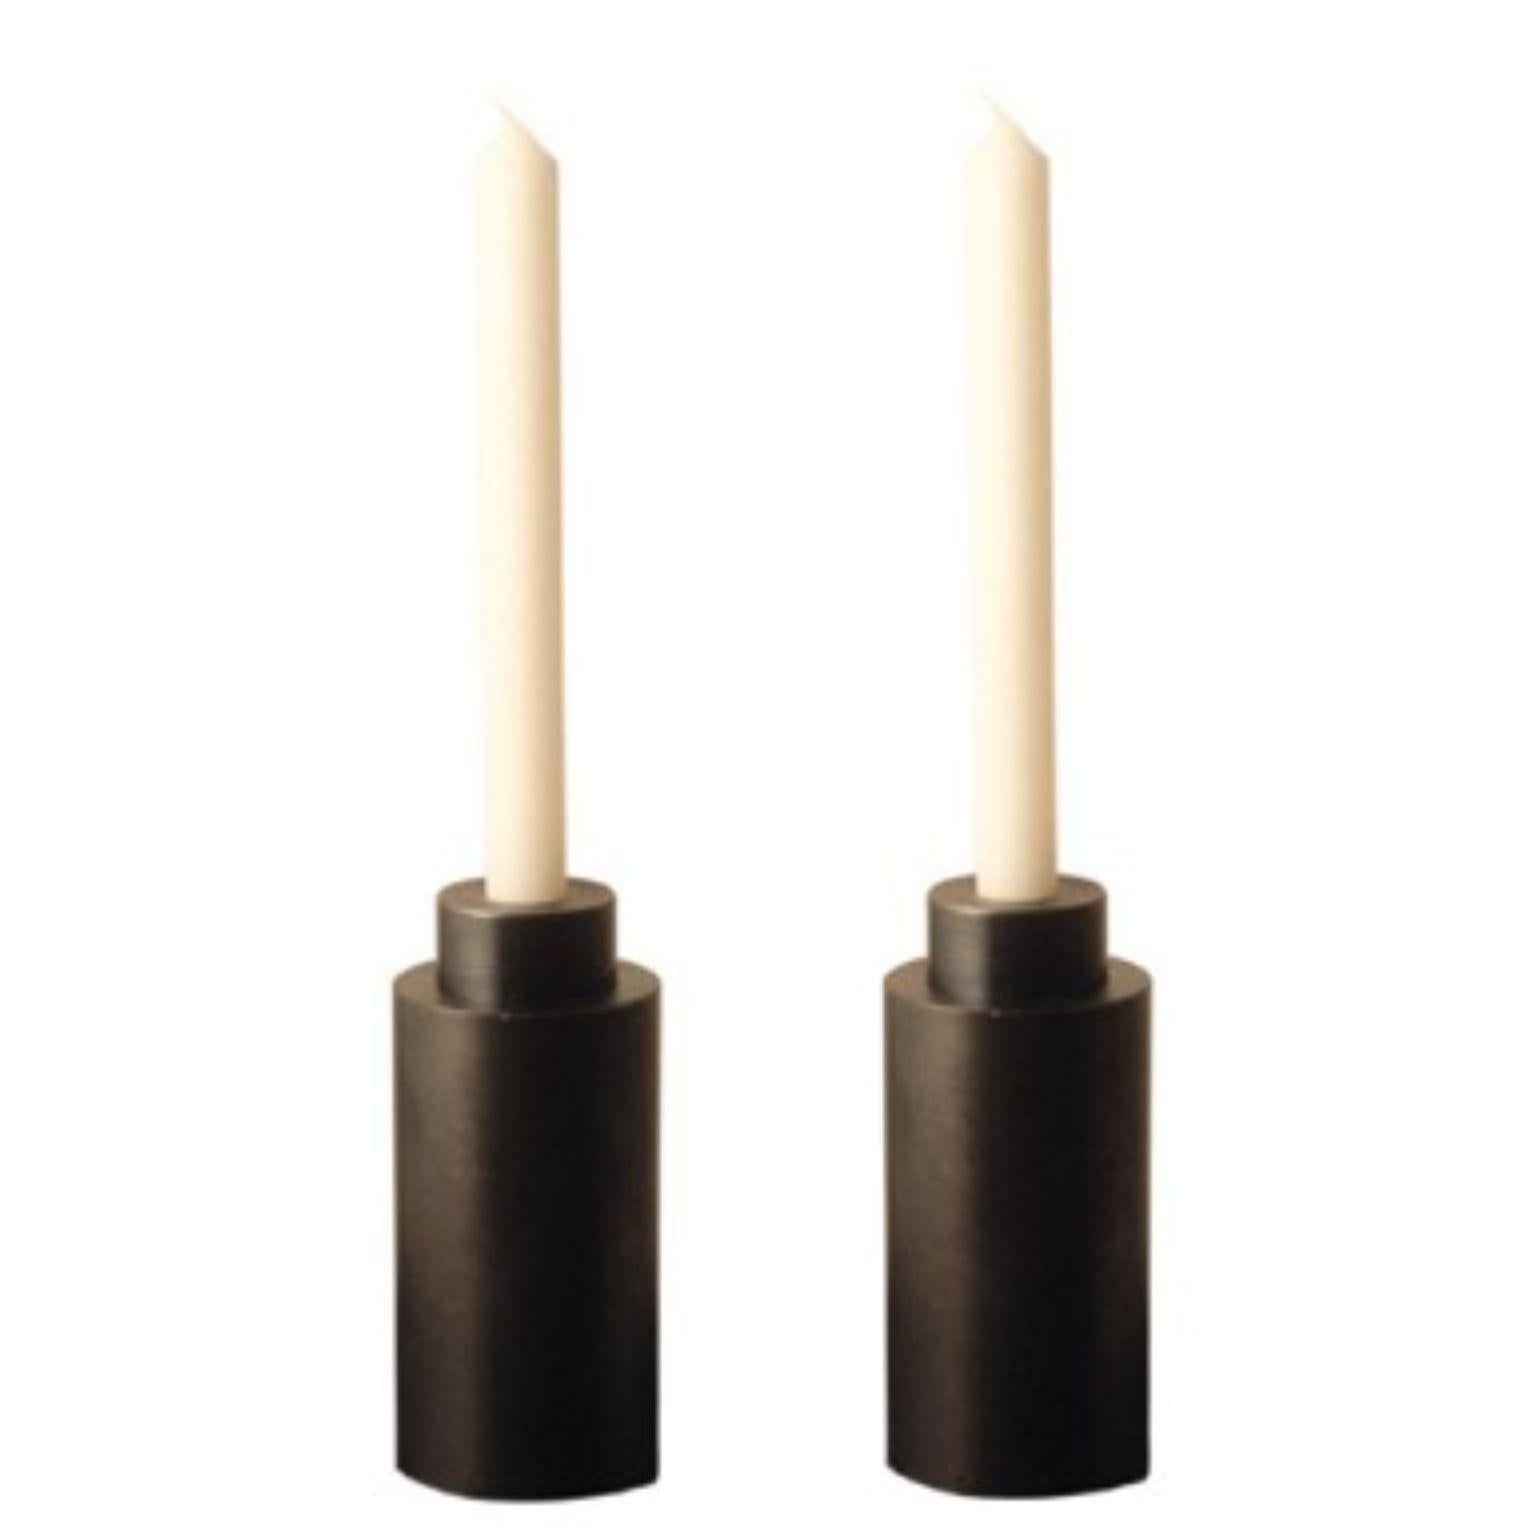 Set of 2 steel bold candleholders by Radu Abraham.
Materials: Steel.
Dimensions: D6 x H12cm.

2 piece candle holder; can be used with multiple types of candles or with standard candle pill; if detached from each other, each element can be used